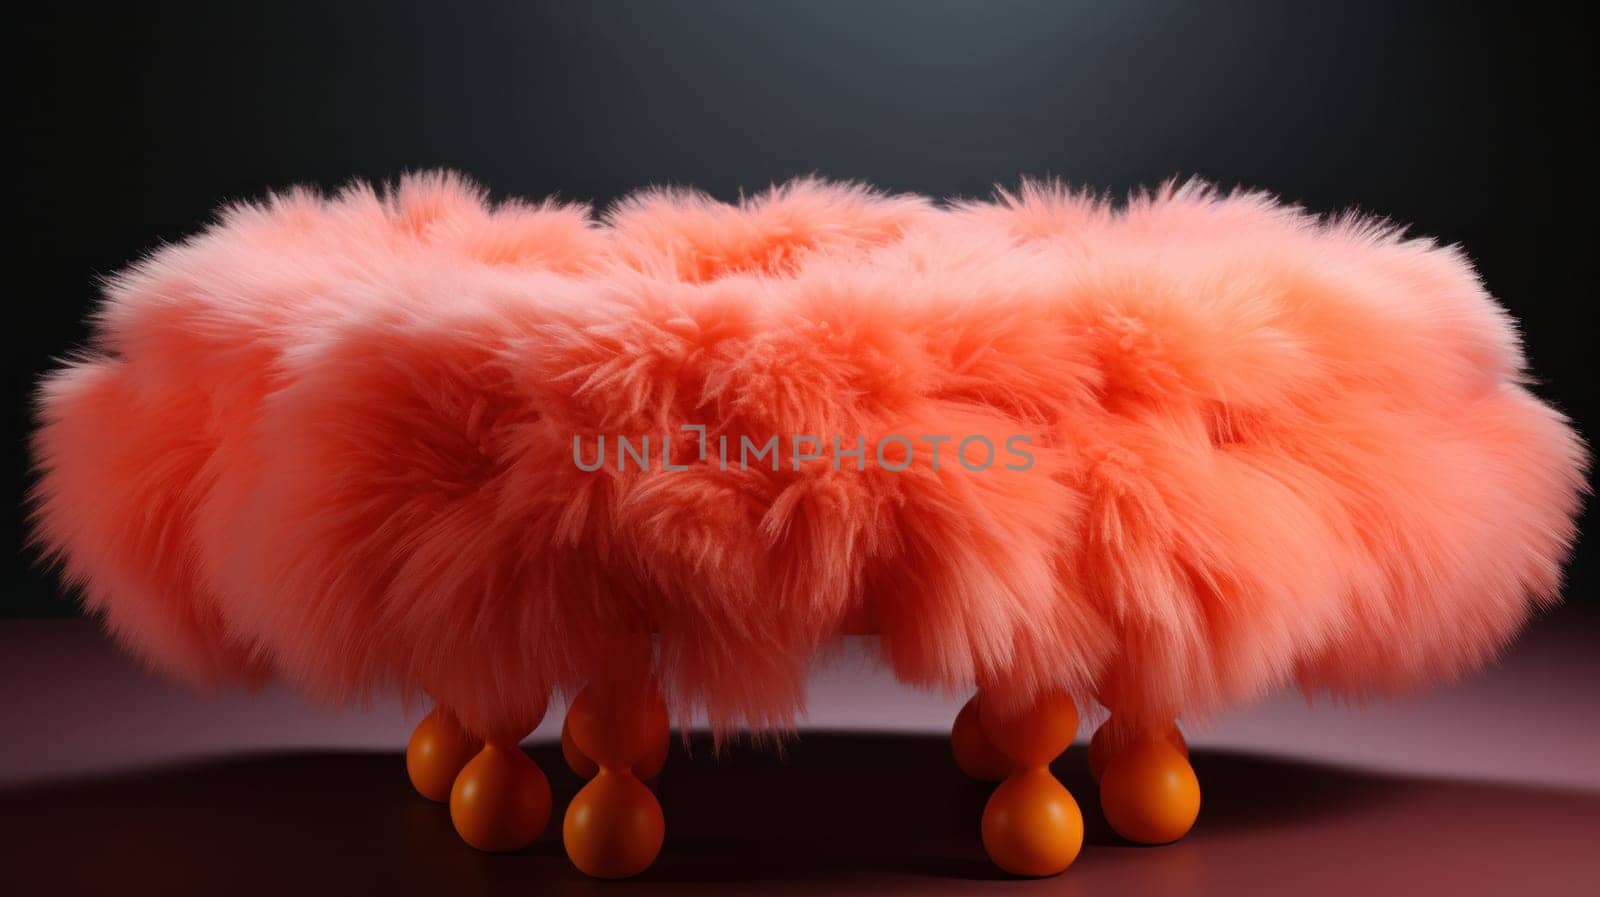 A large fluffy orange chair with wooden legs on a dark background, AI by starush